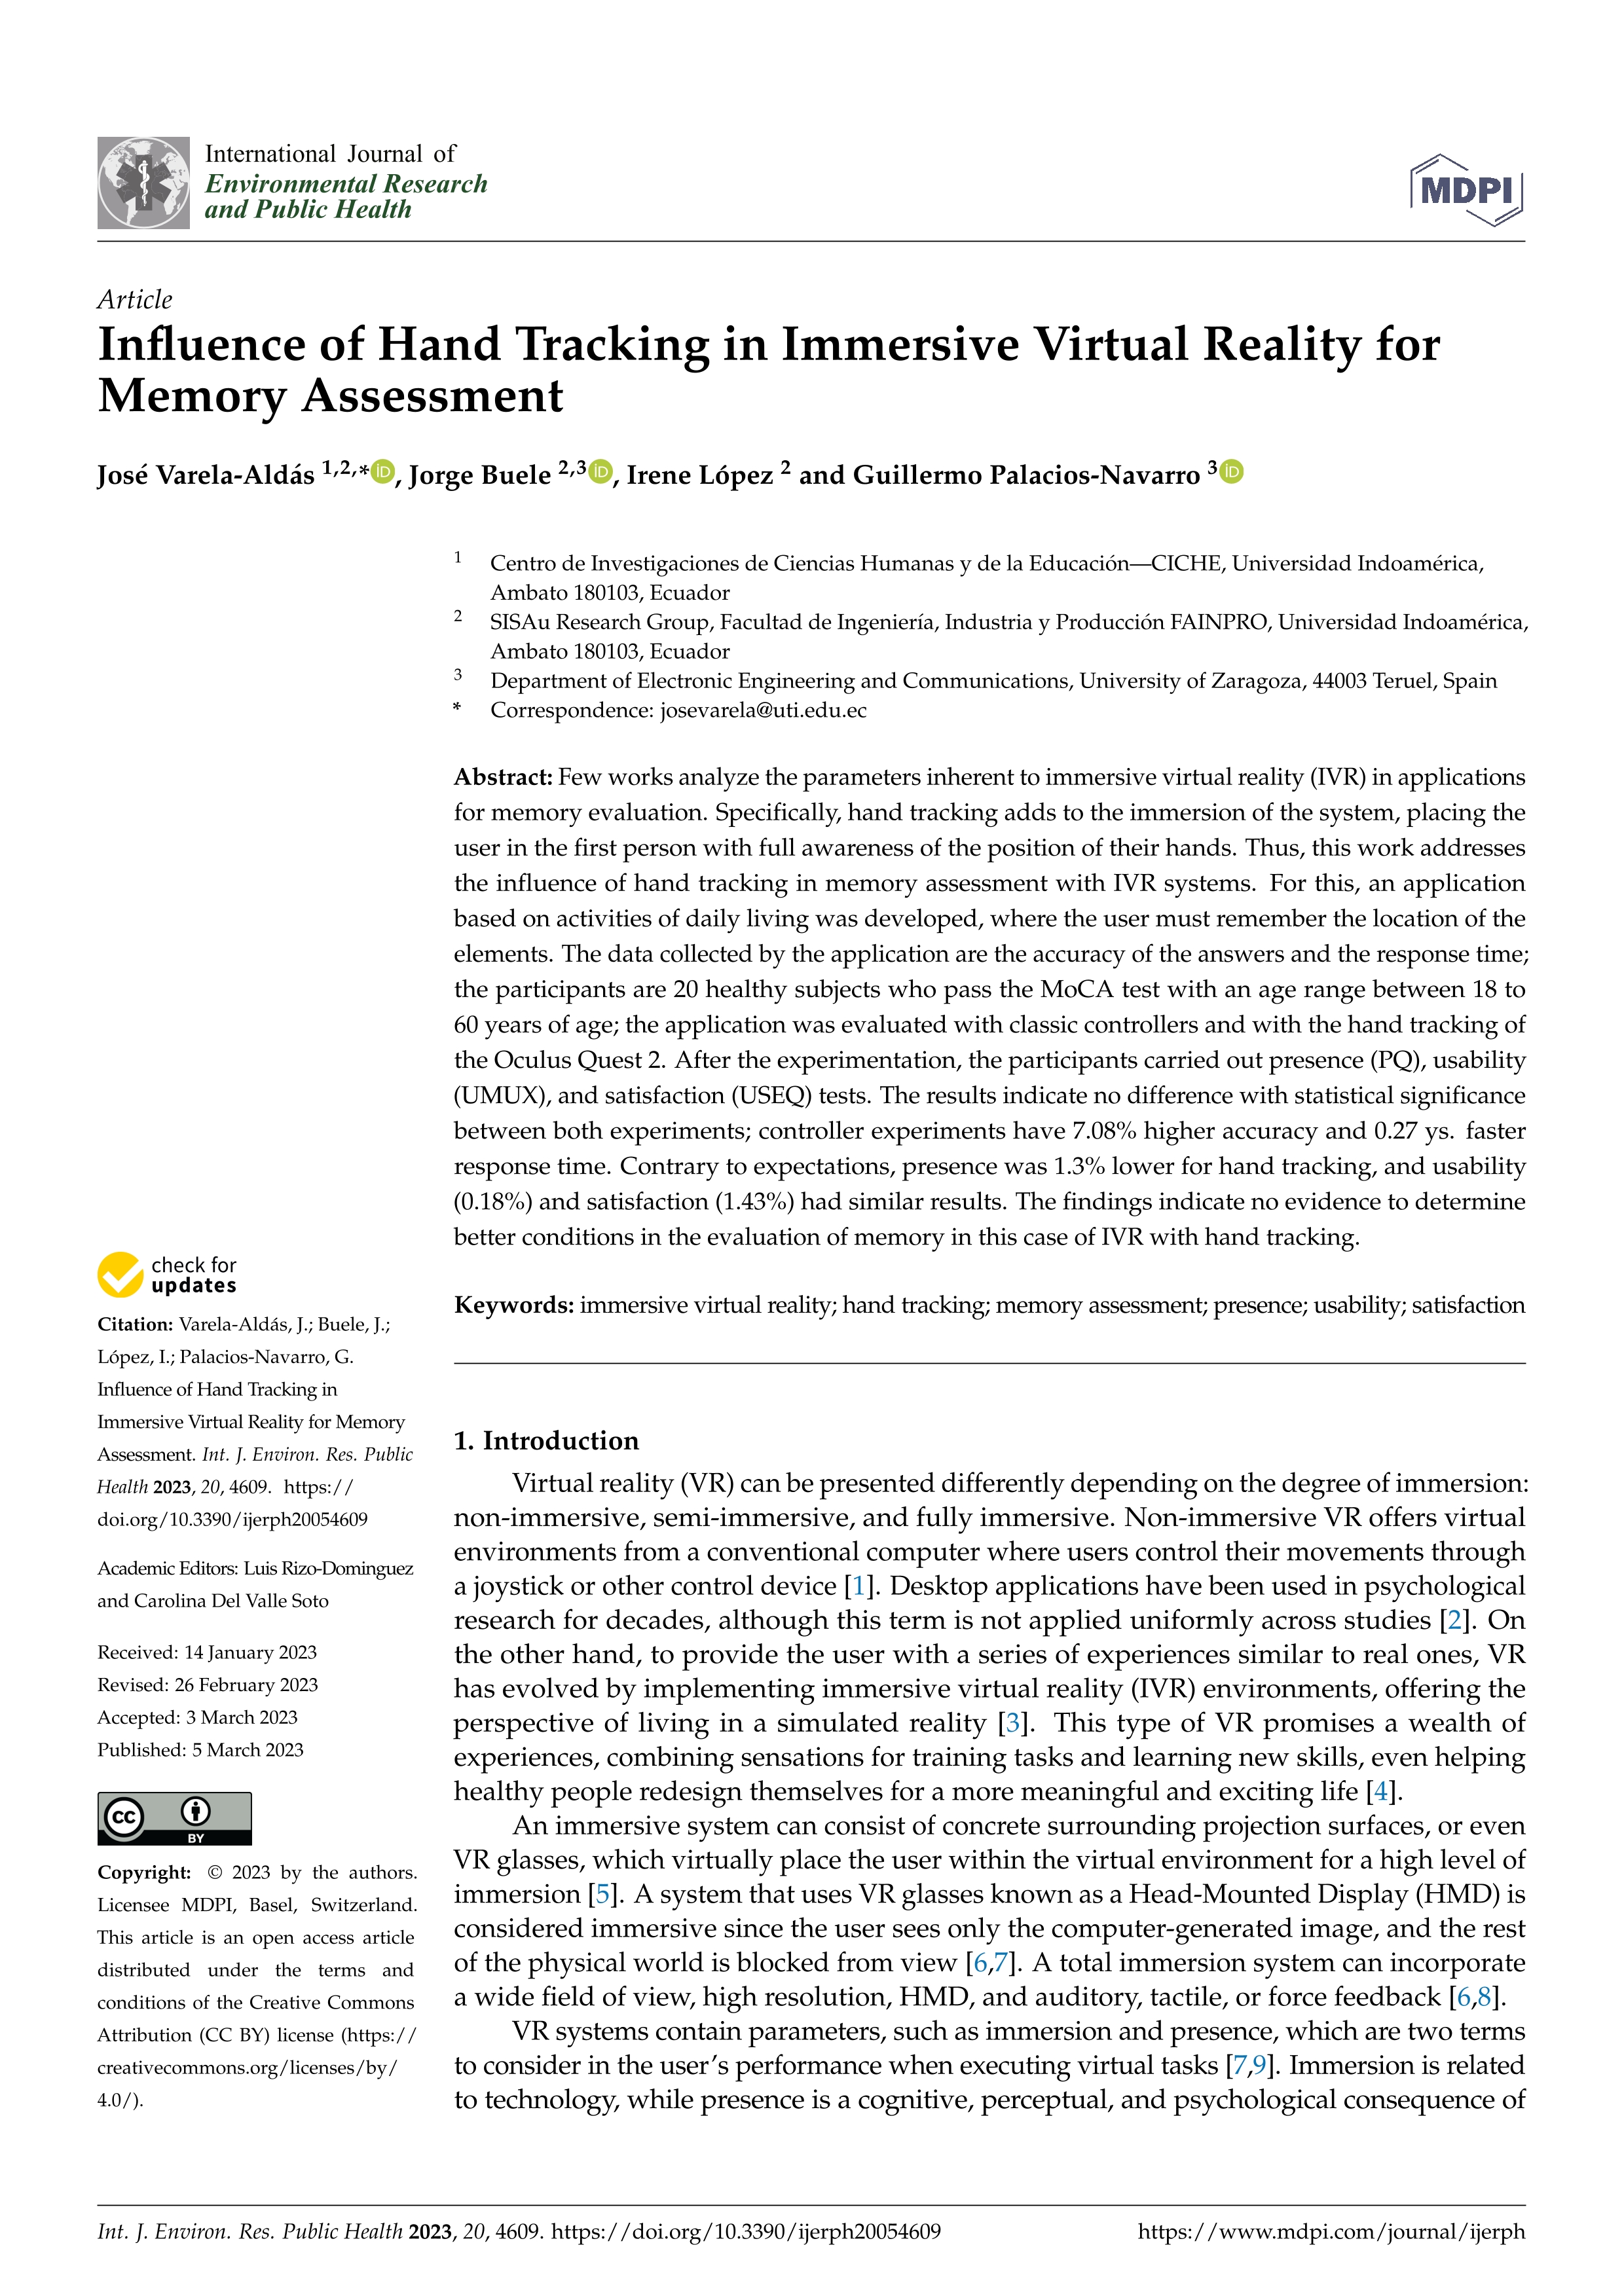 Influence of hand tracking in immersive virtual reality for memory assessment